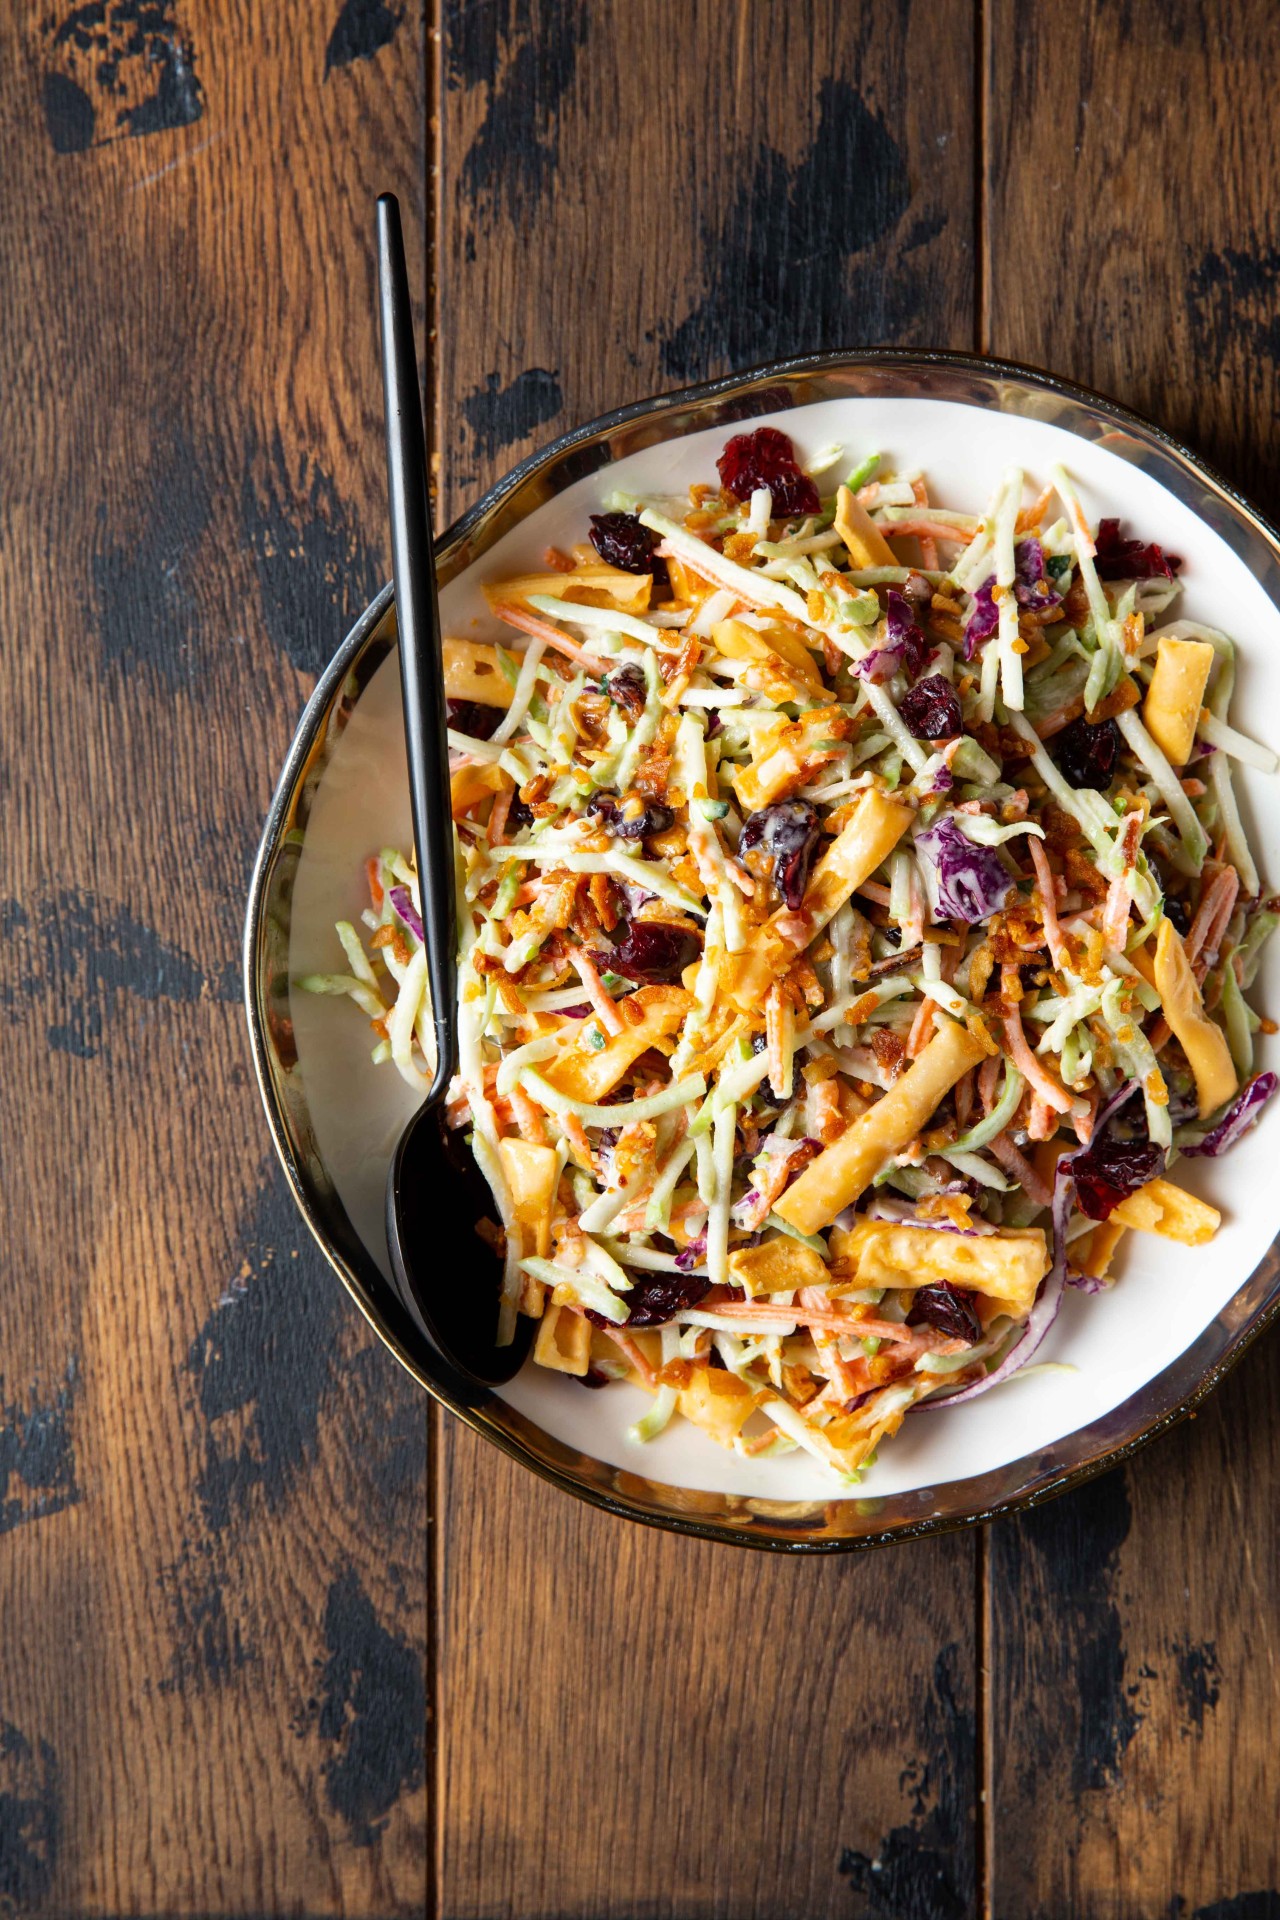 Crunchy Broccoli Slaw with Tangy Maple Dressing